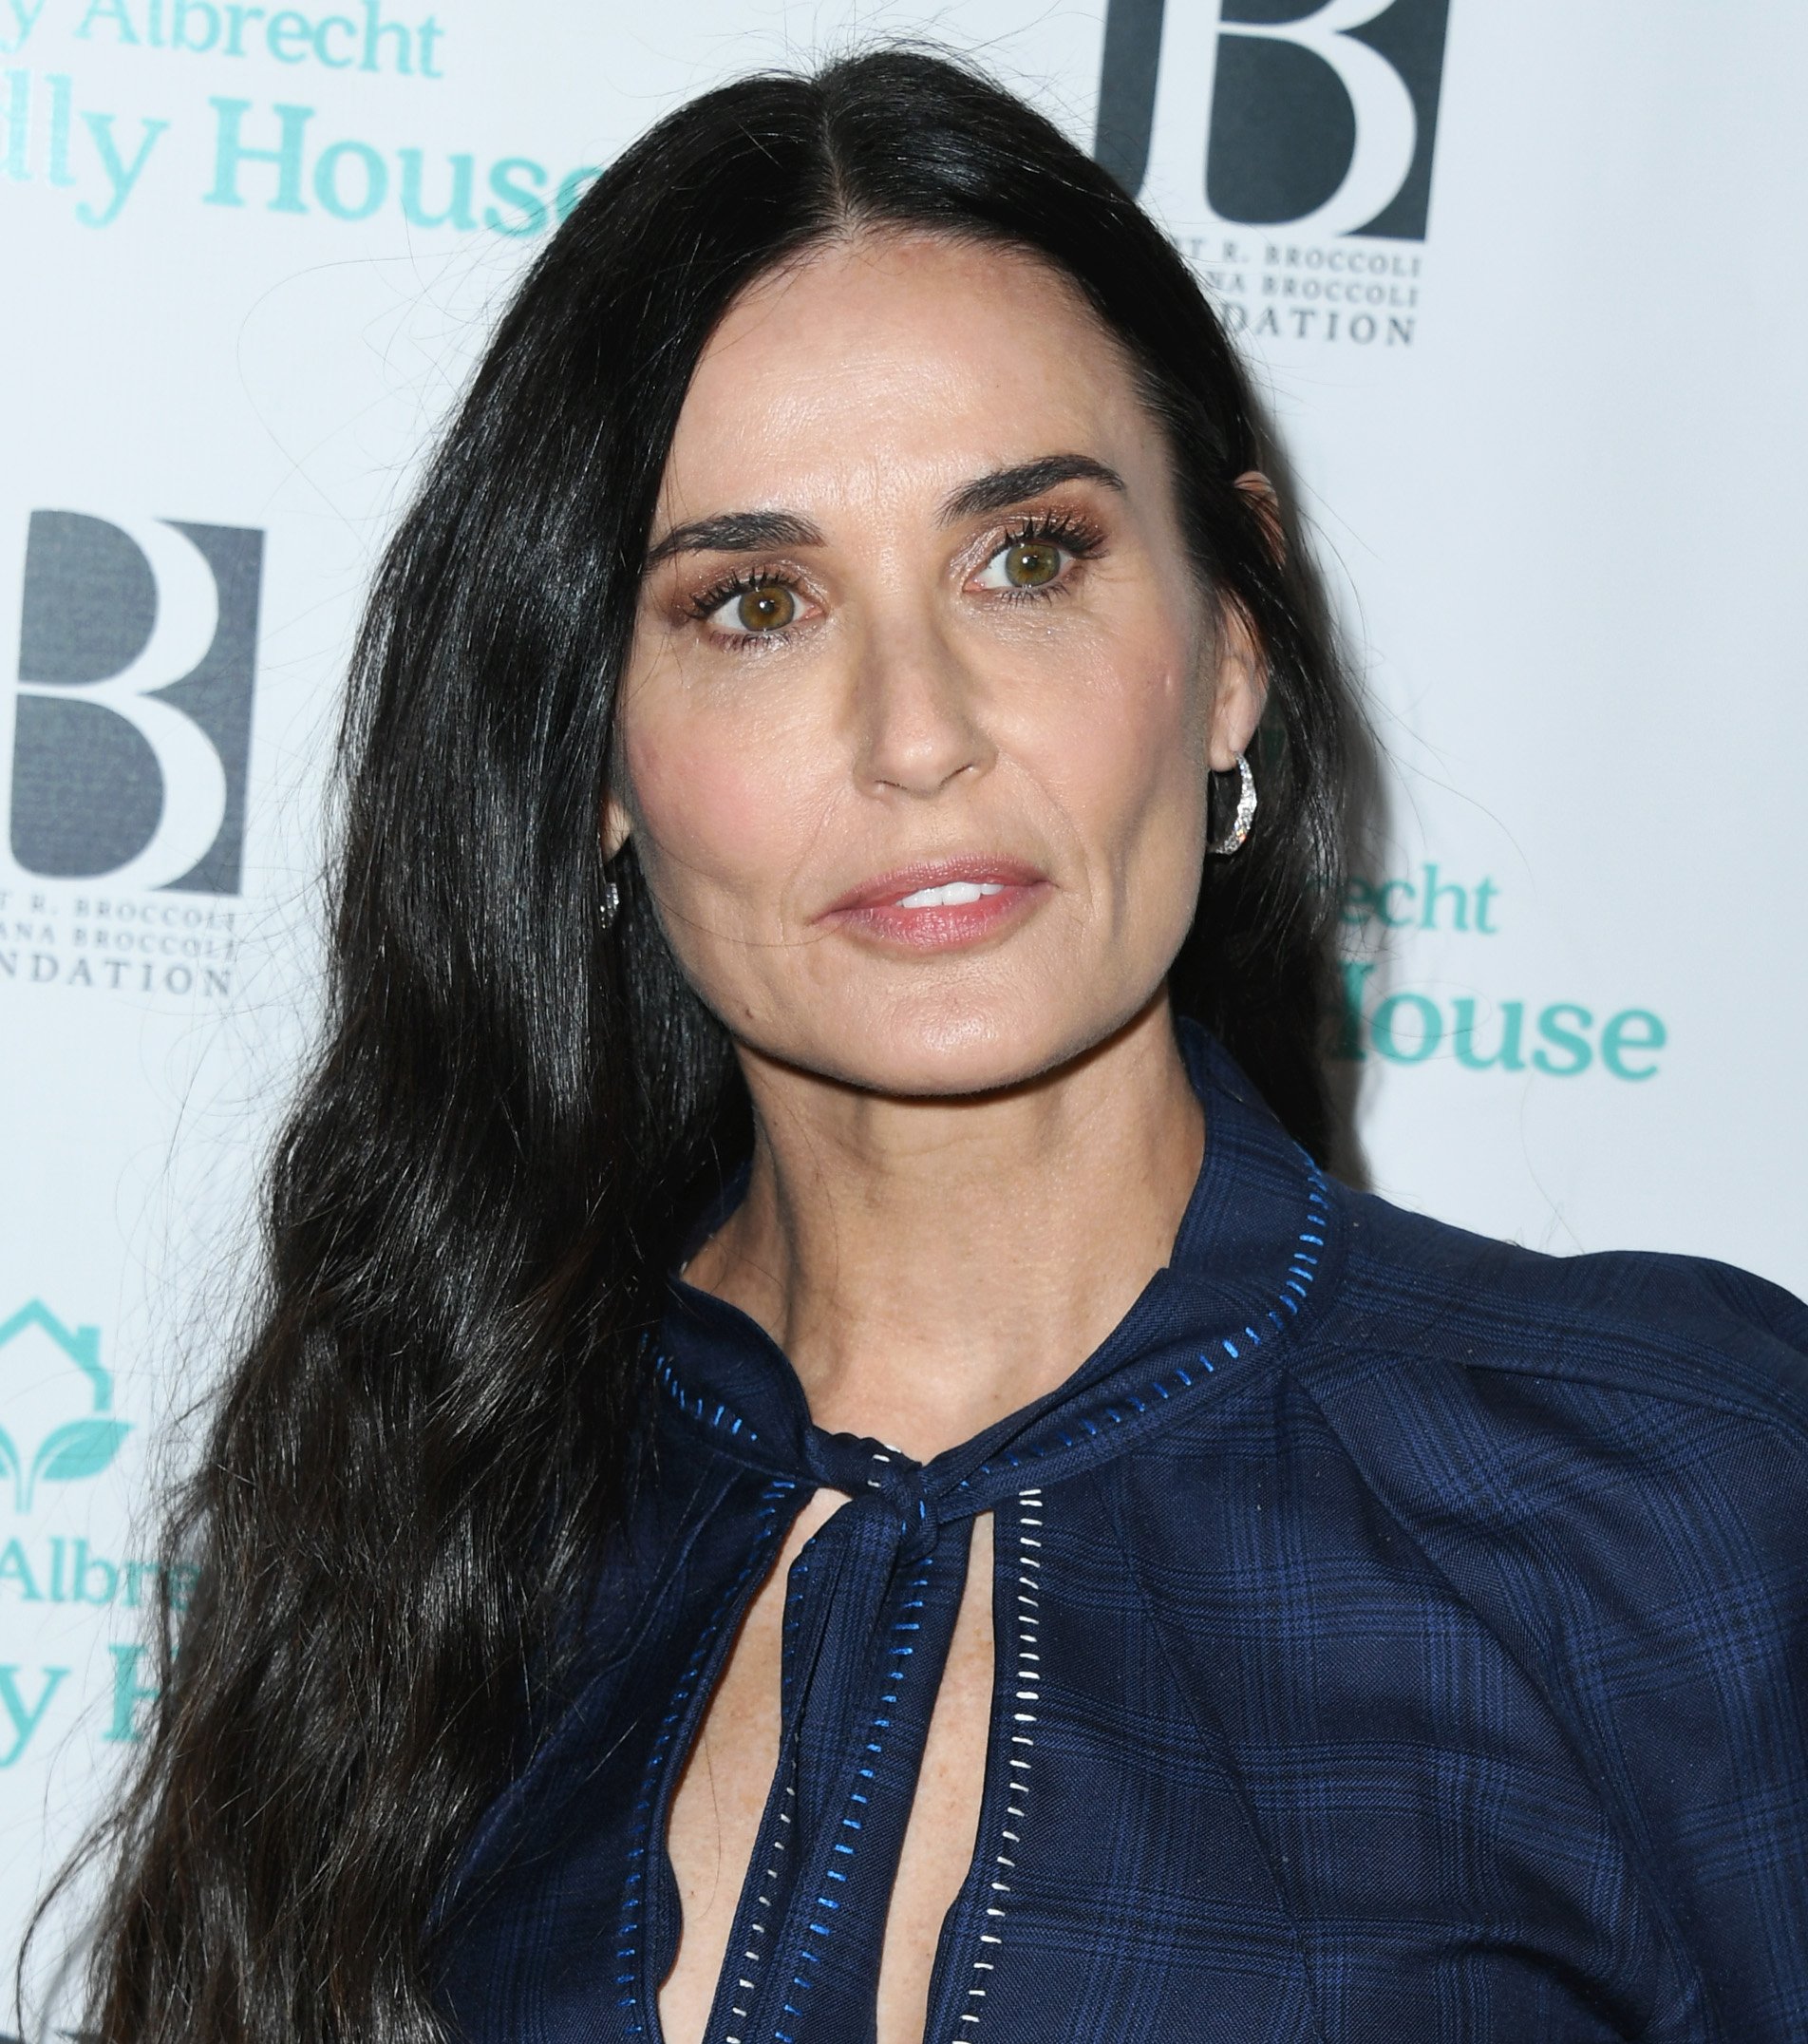 Demi Moore attends the Friendly House 30th Annual Awards Luncheon on October 26, 2019 at The Beverly Hilton Hotel, California. | Photo: Getty Images